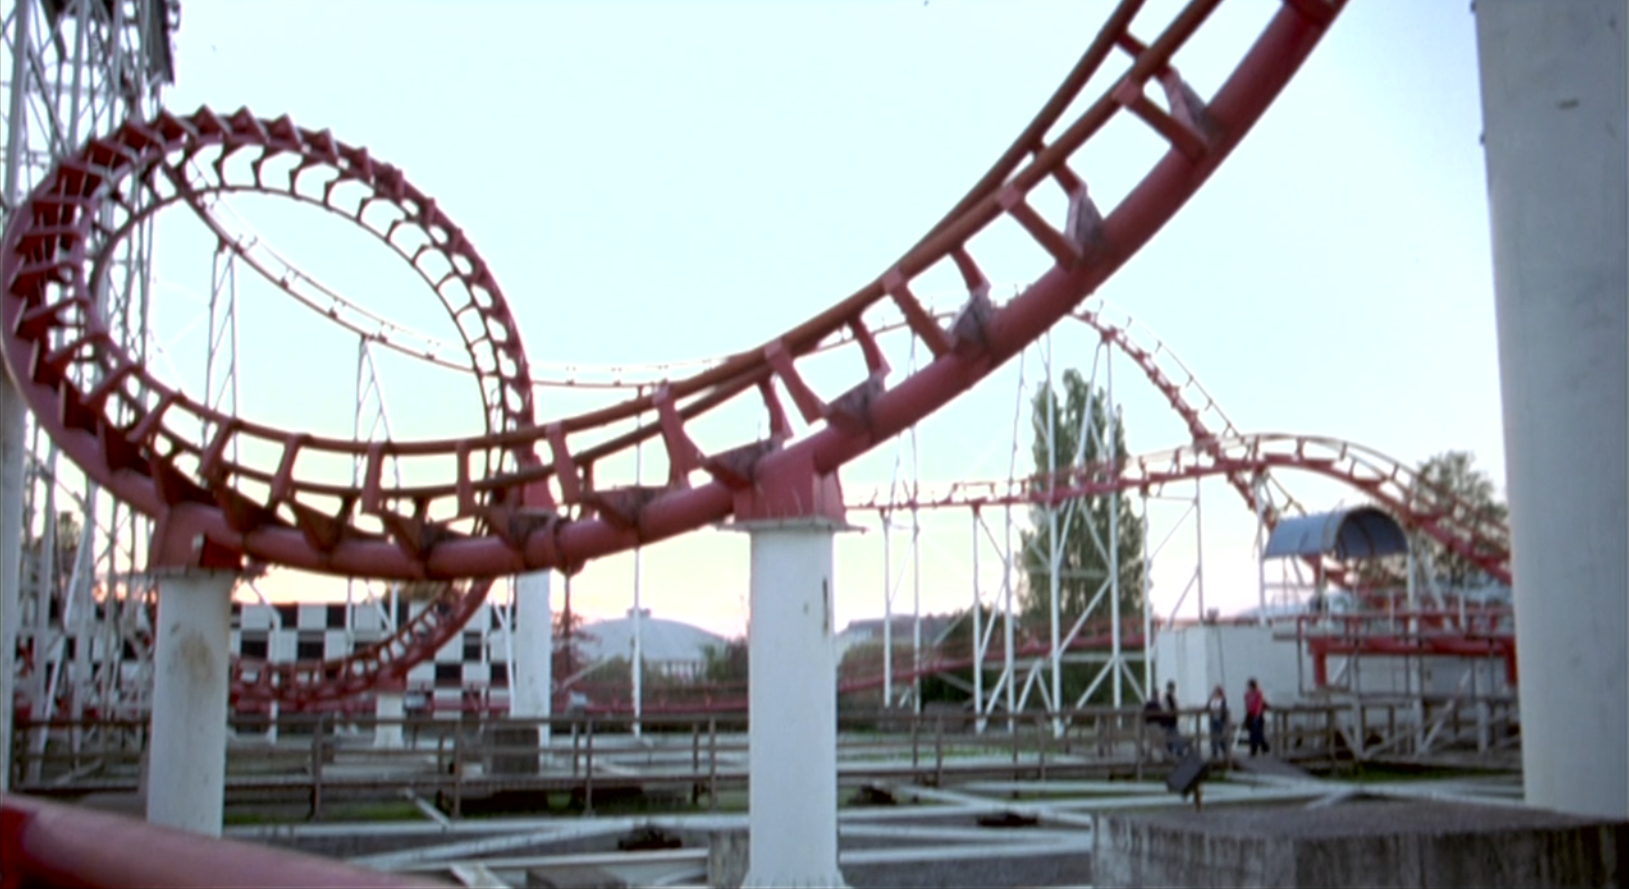 Corkscrew, you can see the lift hill and corkscrew on the left of the image, the characters are walking on a path through the middle.